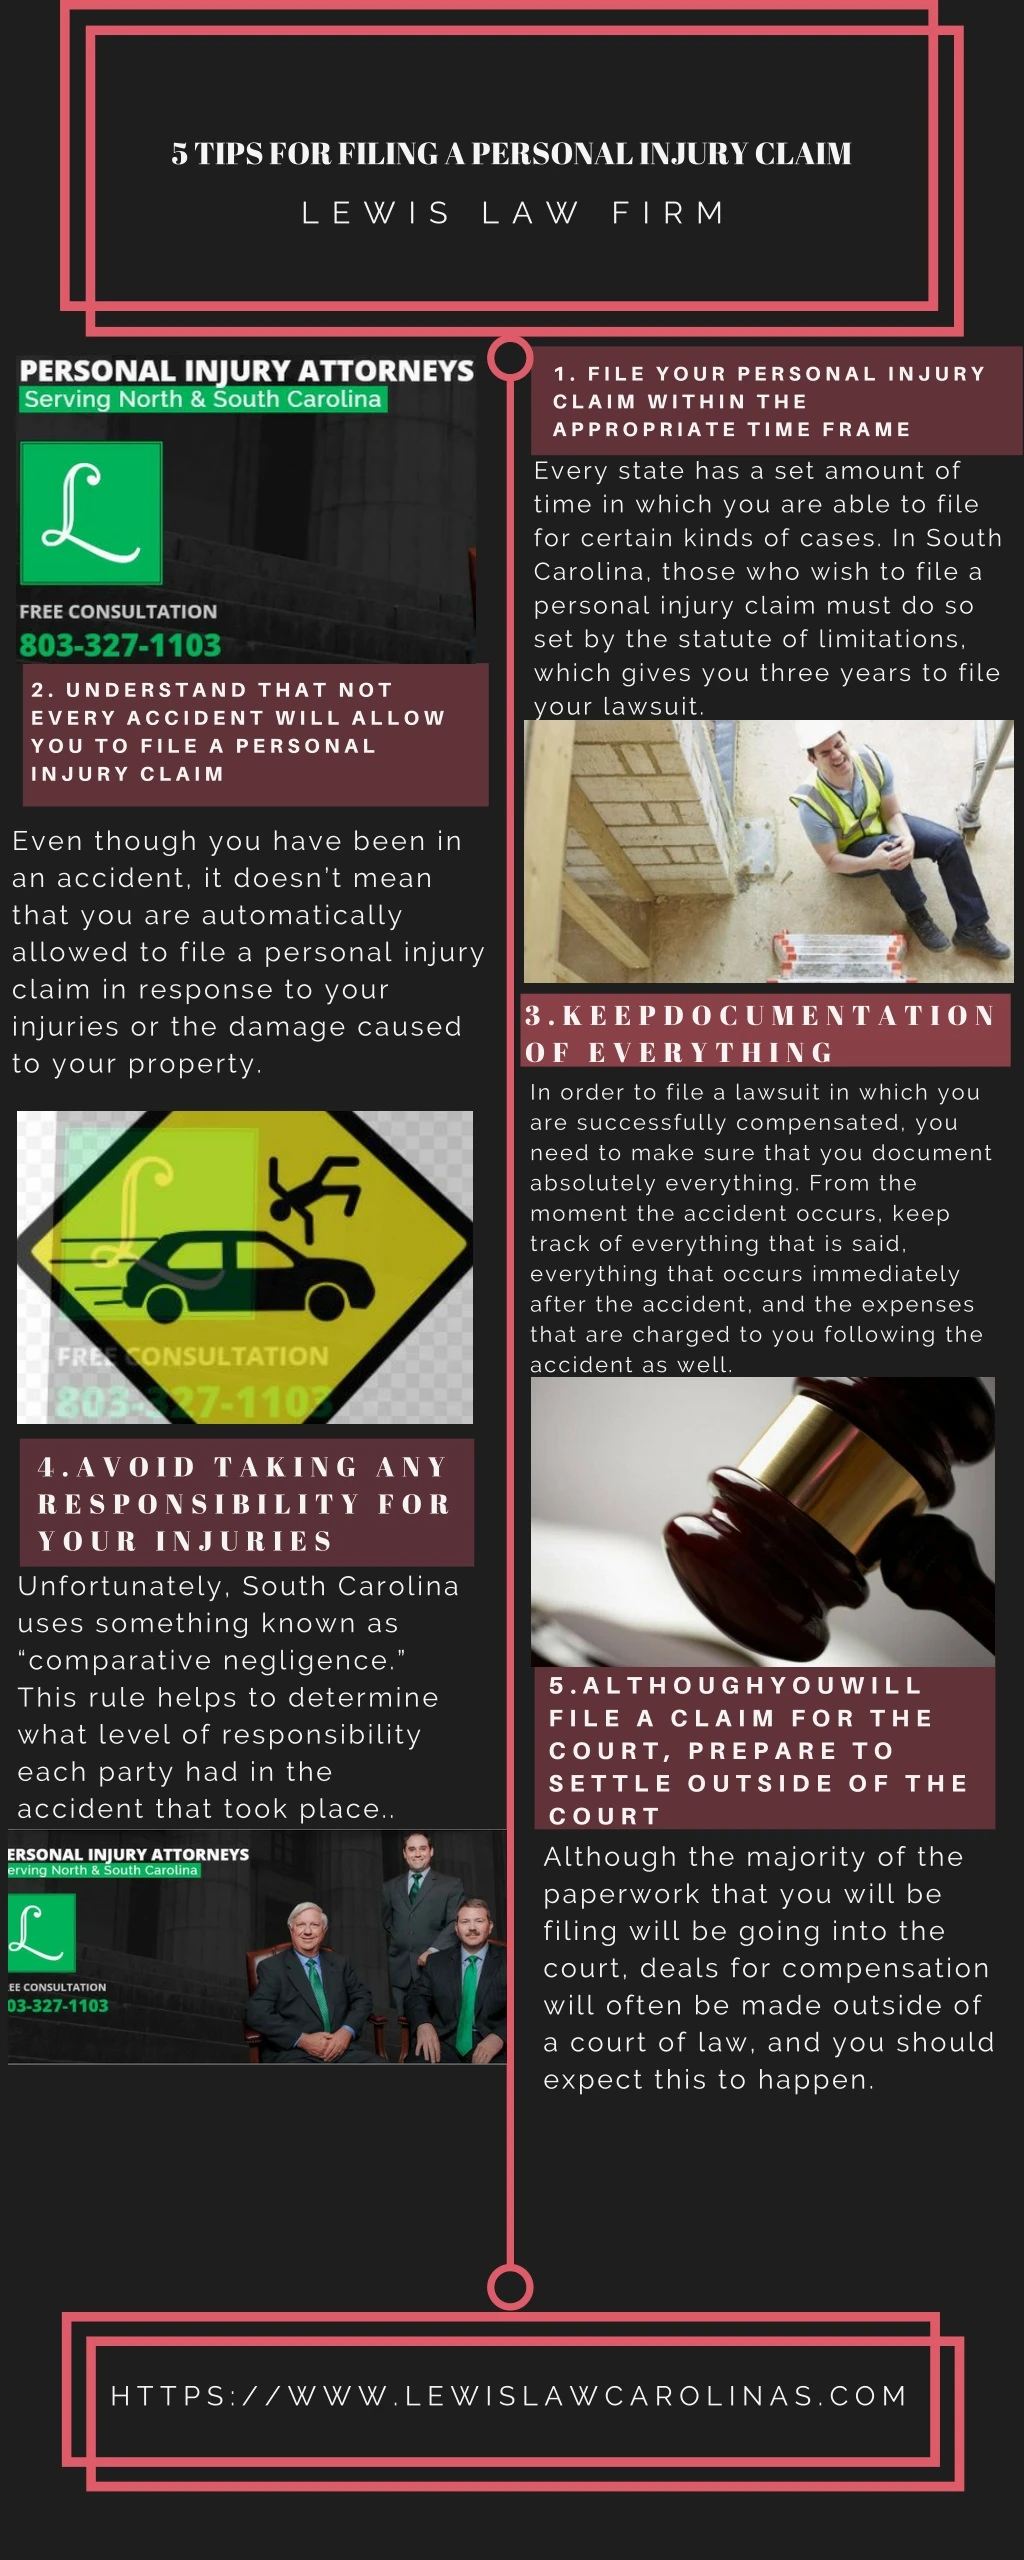 5 tips for filing a personal injury claim